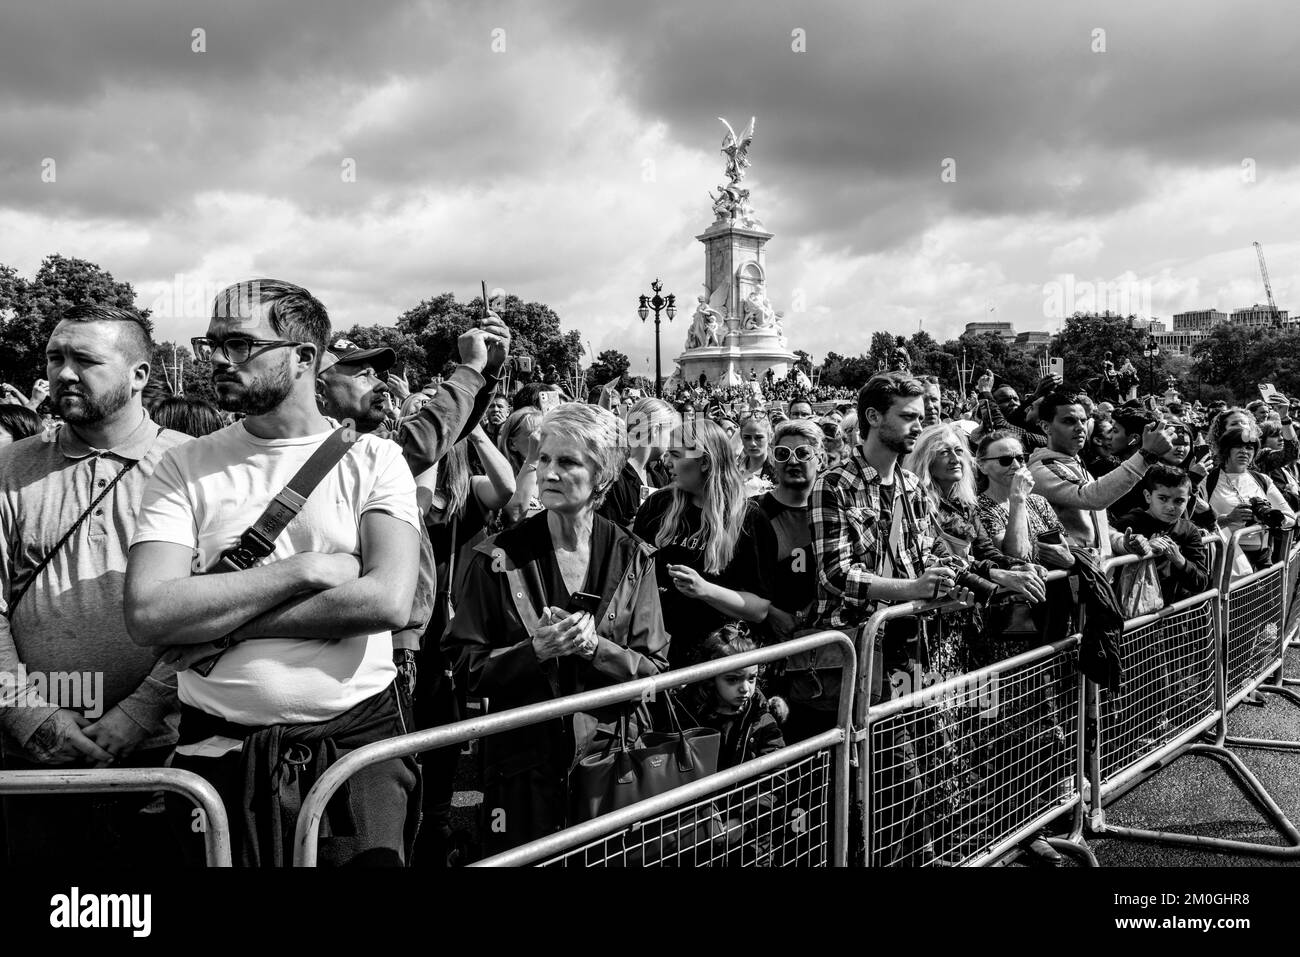 British People Wait Outside Buckingham Palace For The Arrival Of King Charles III Following The Death Of Queen Elizabeth II, London, UK. Stock Photo